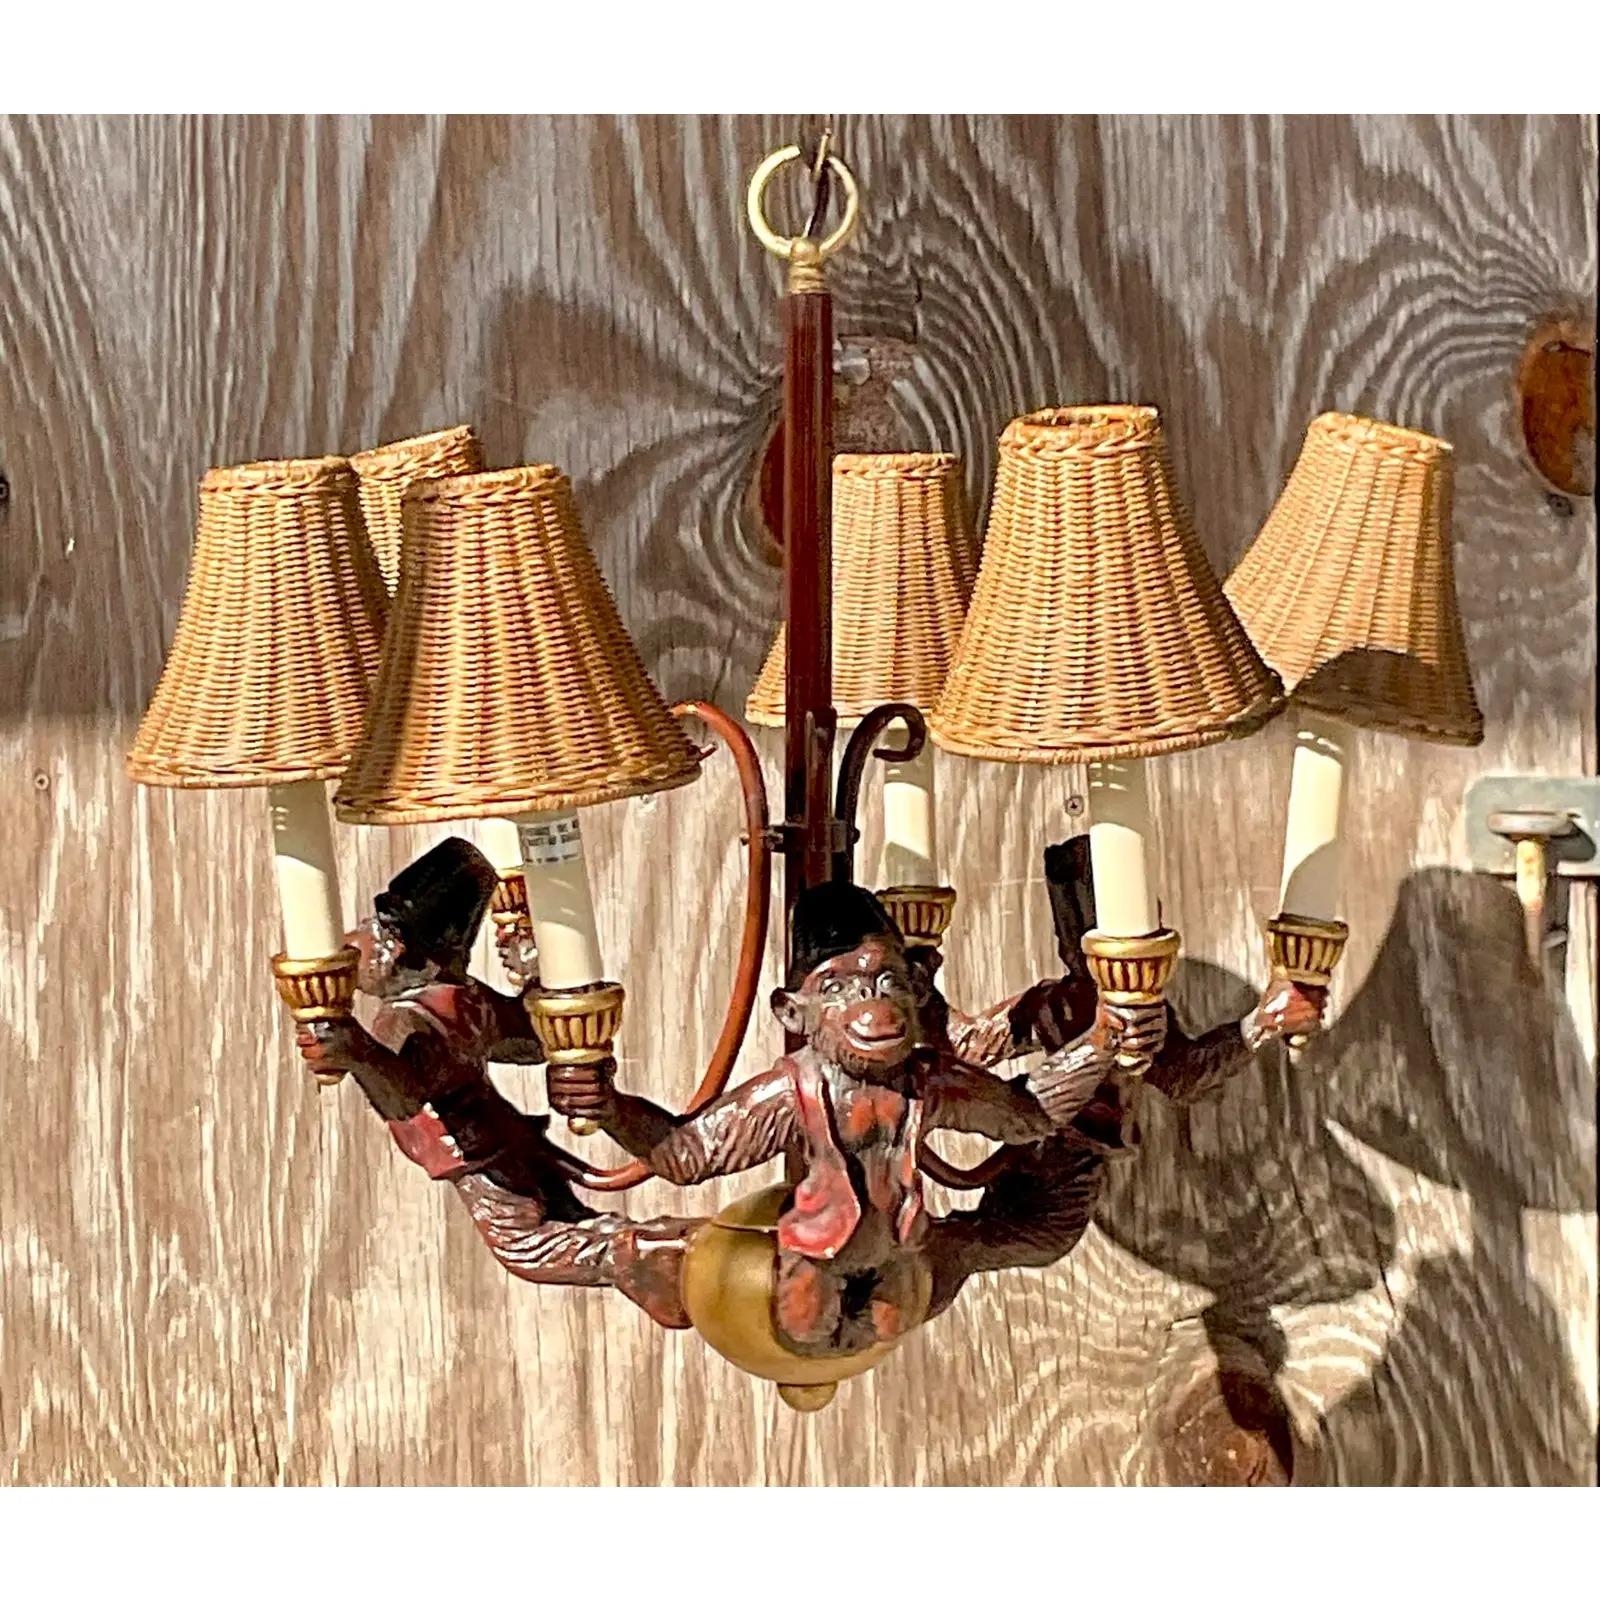 A fantastic vintage Boho chandelier. The iconic monkey design in warm rich colors. Little rattan shades add to the charm. Acquired from a Palm Beach estate